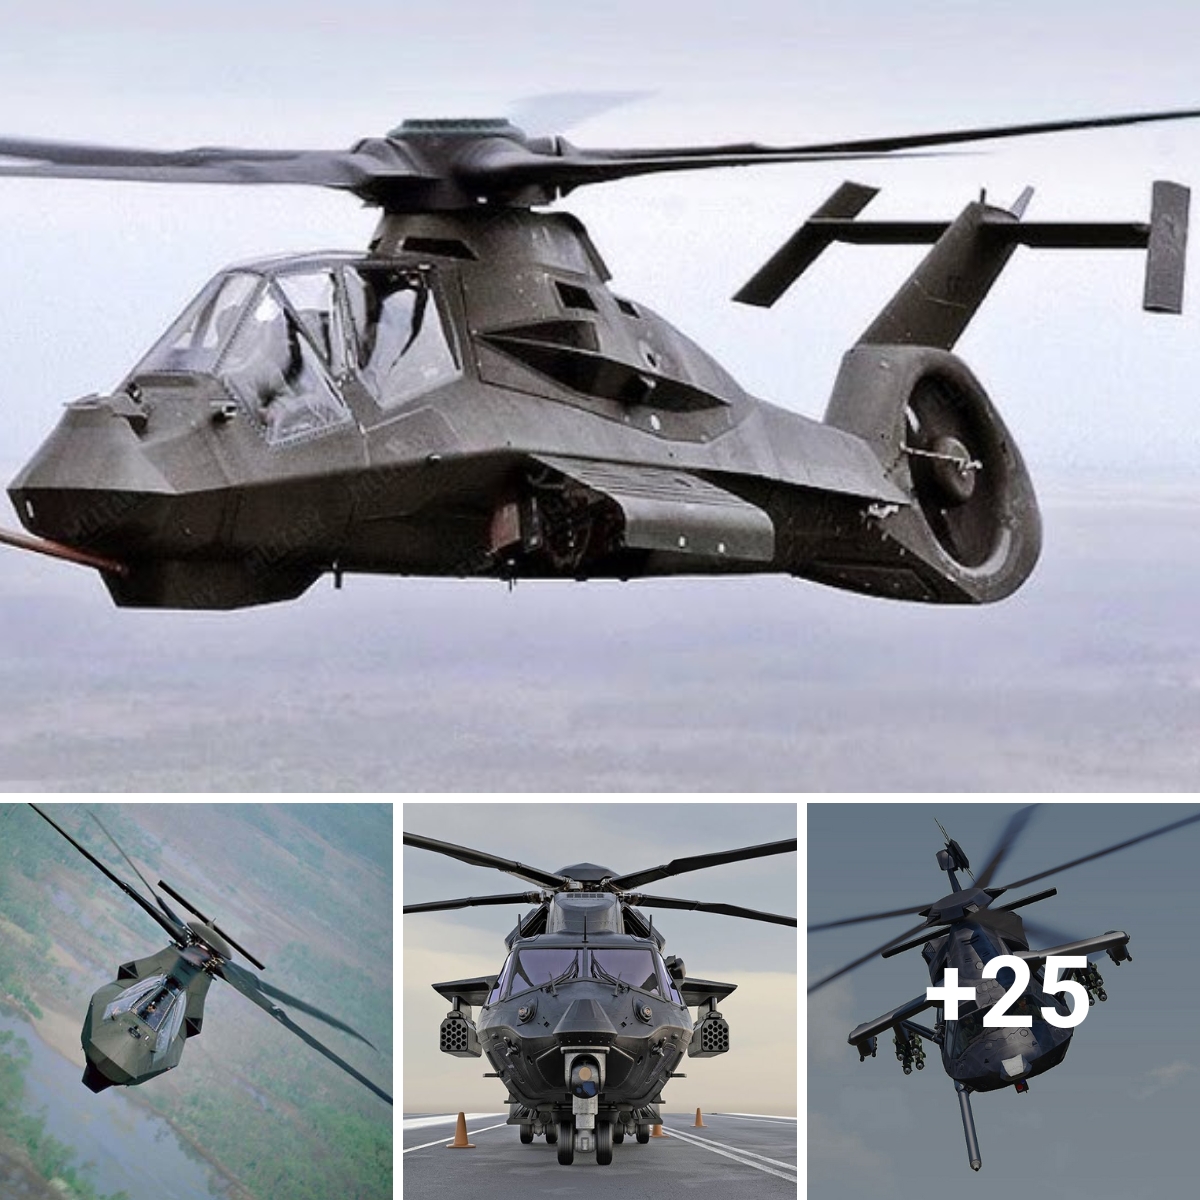 The world’s most technologically advanced helicopter